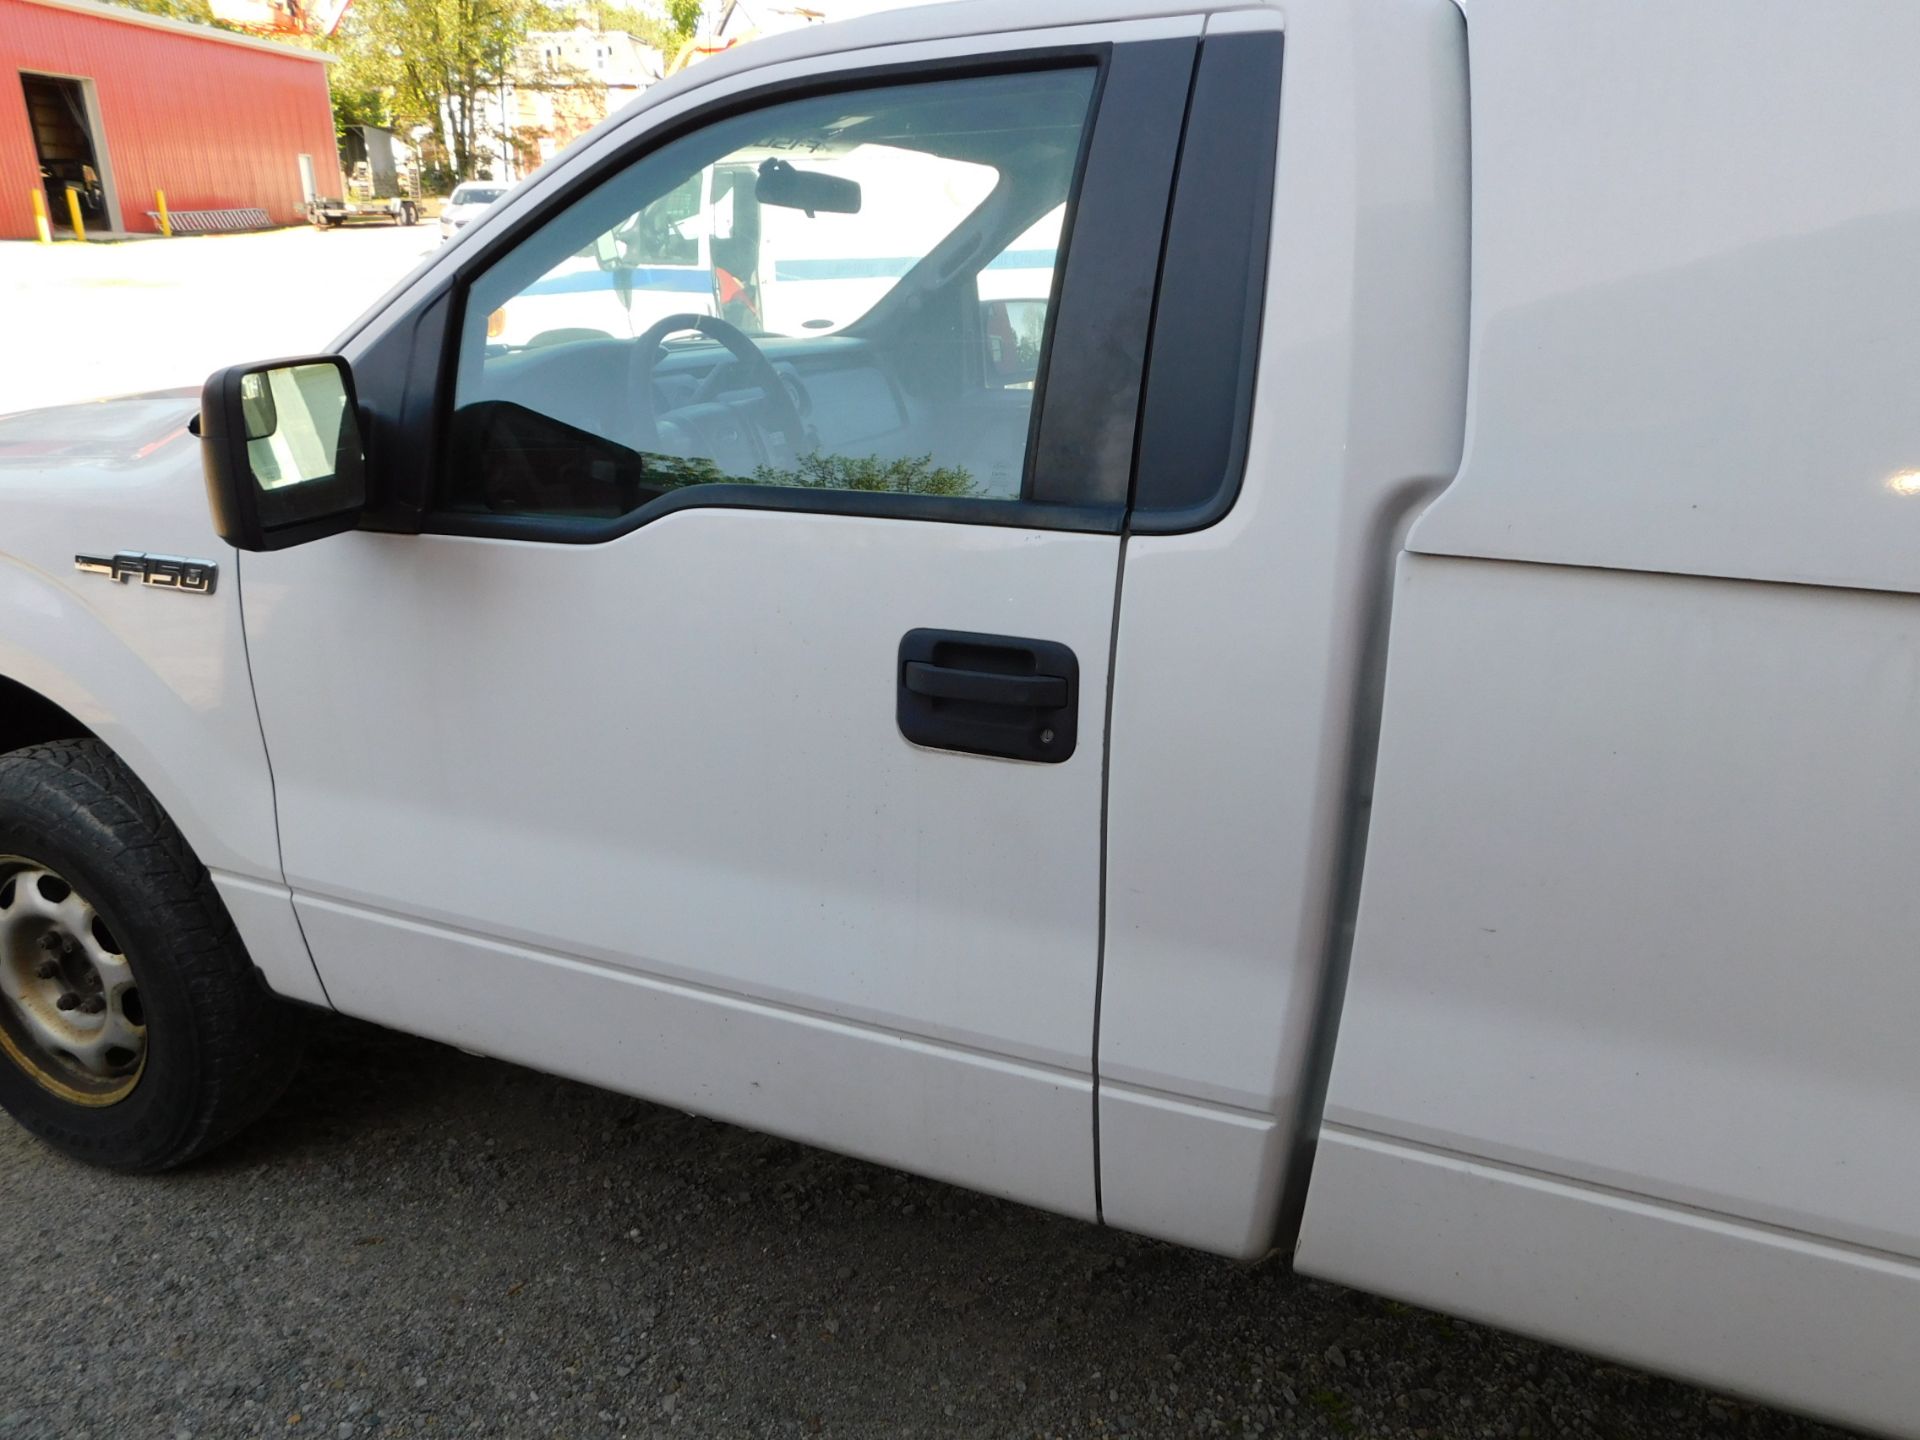 2011 Ford Pick up F-150XL vin 1FTMF1CM3CKD12942, Automatic Transmission, PW, Pl, 8'Bed w/Cap 146,289 - Image 20 of 46